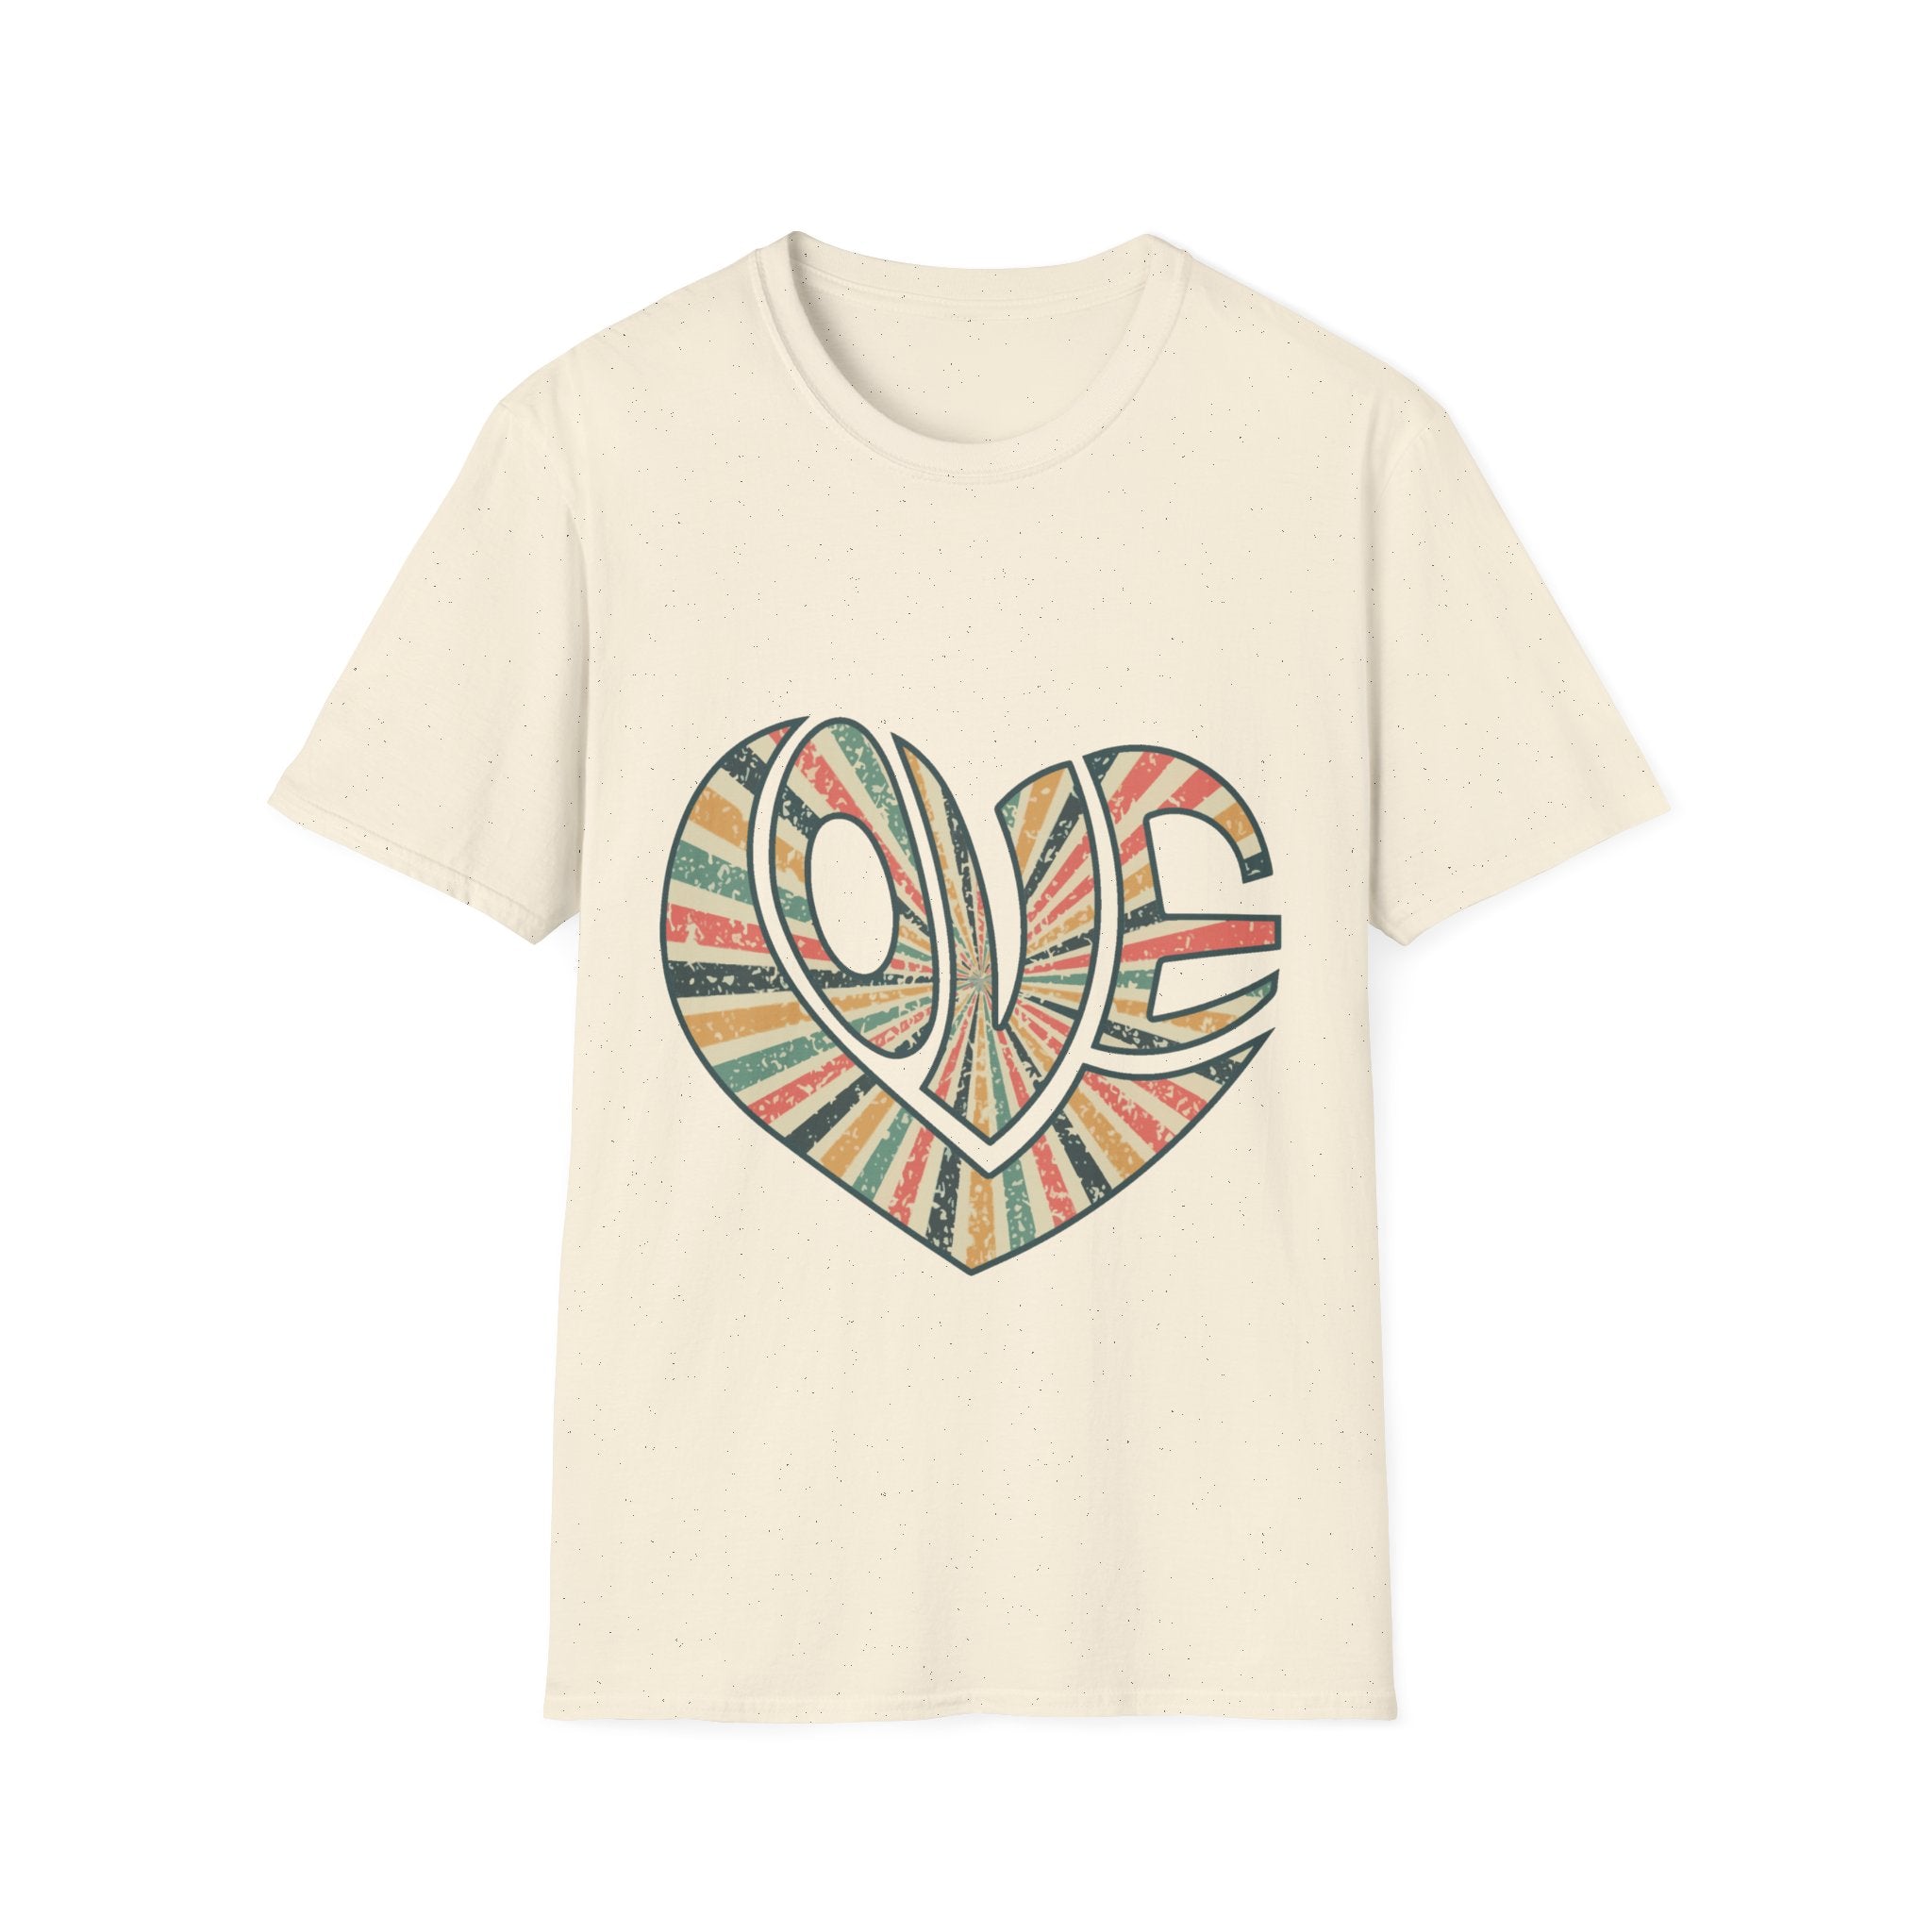 Retro Love T-Shirt: Vintage Vibes with a Modern Twist!